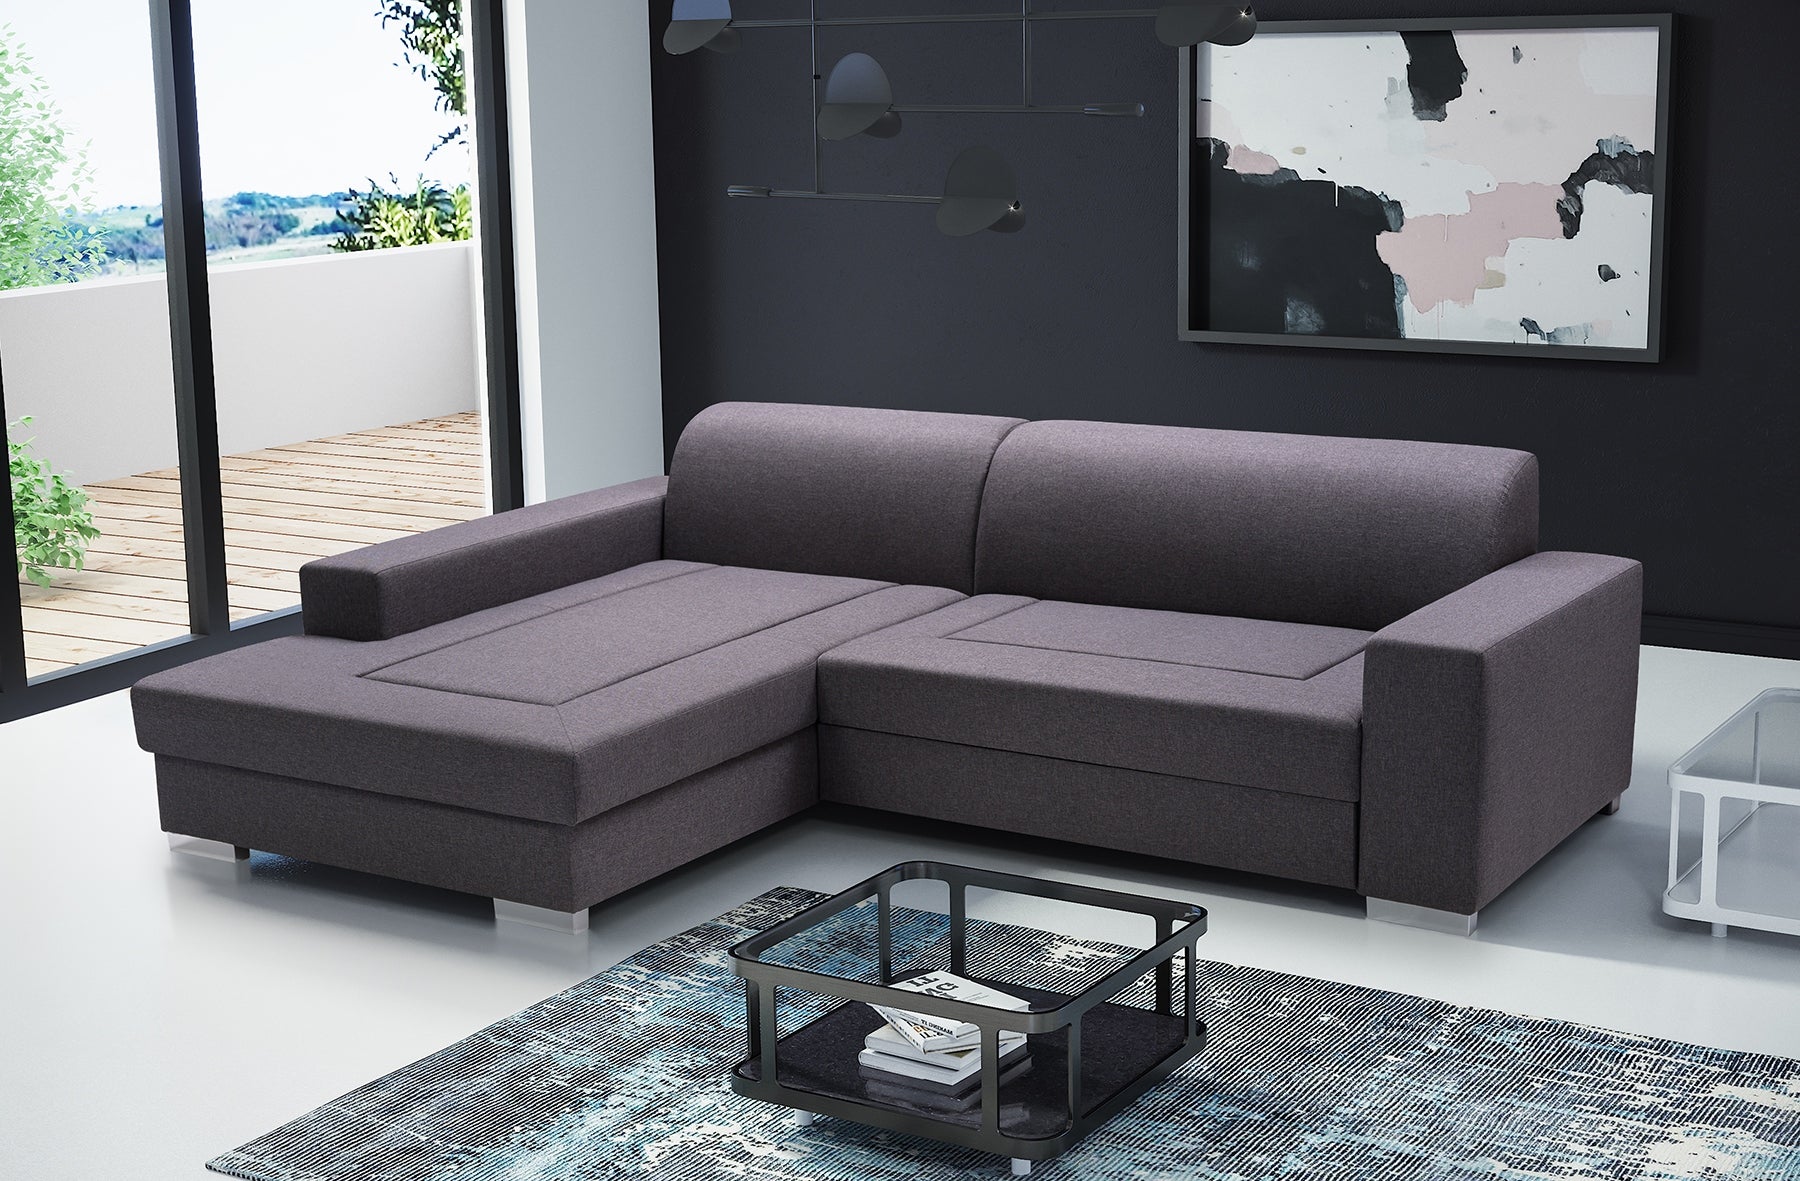 Mallow Modern Corner Sofa Bed With